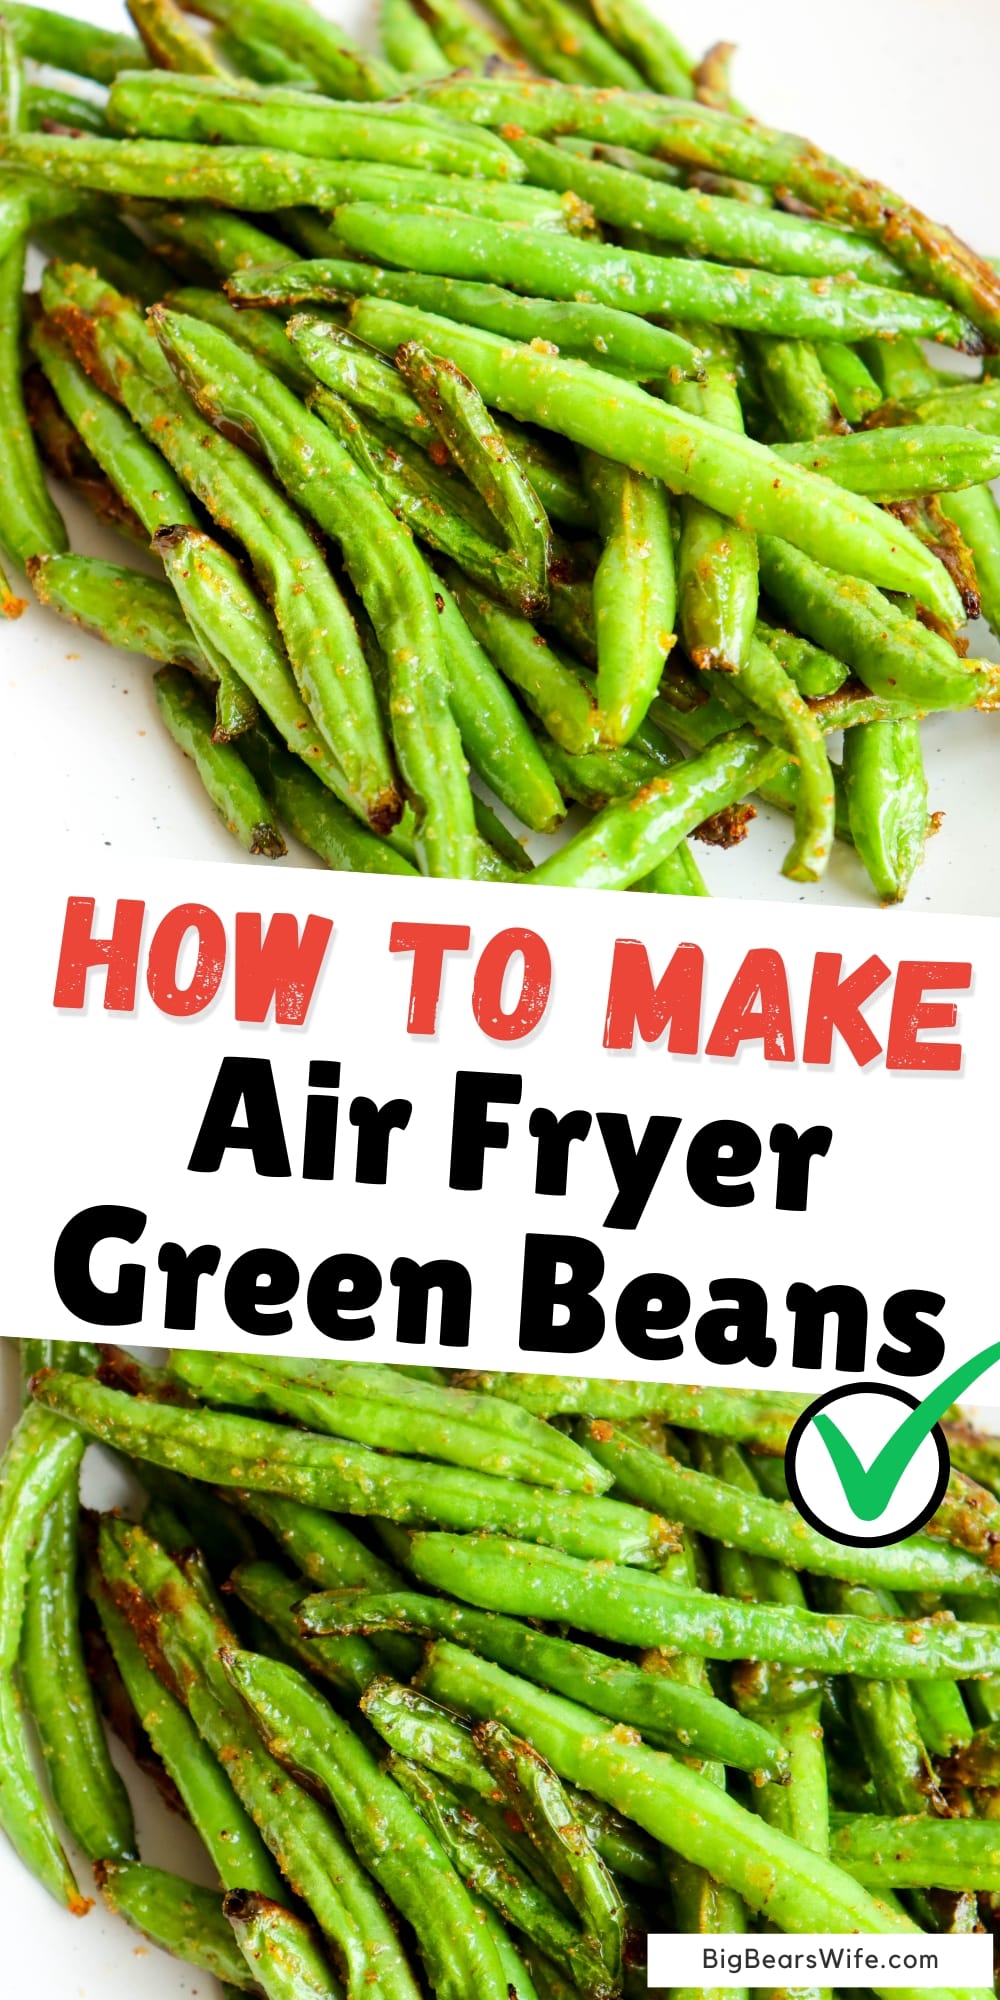 Need a quick and easy side dish for dinner or lunch? These Air Fryer Green Beans are so simple to make! via @bigbearswife